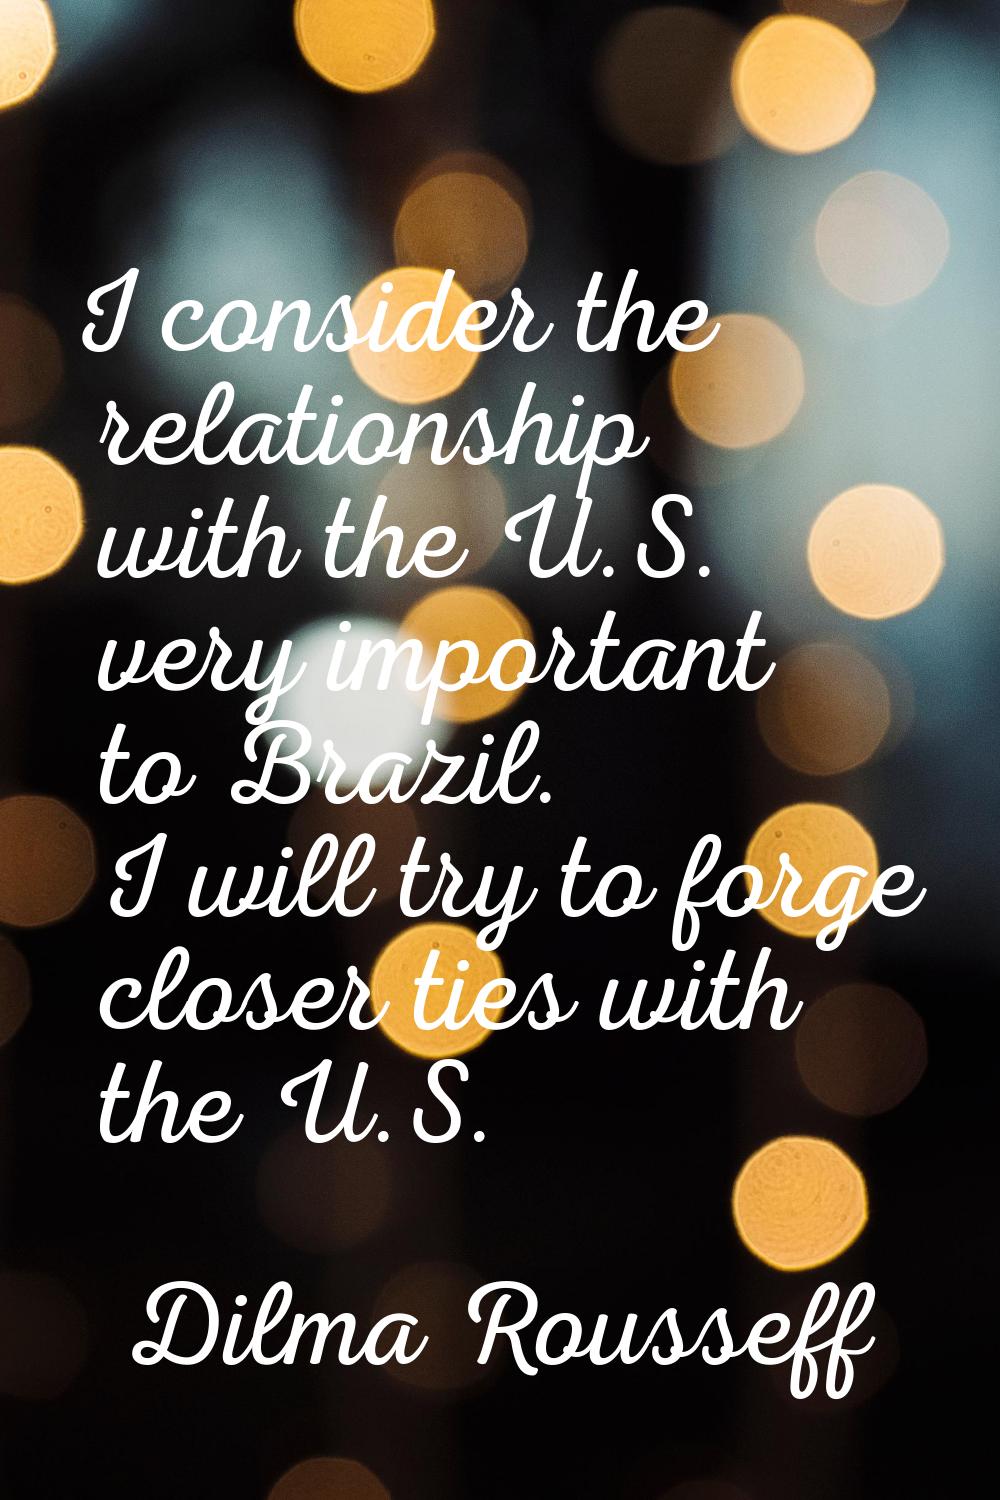 I consider the relationship with the U.S. very important to Brazil. I will try to forge closer ties